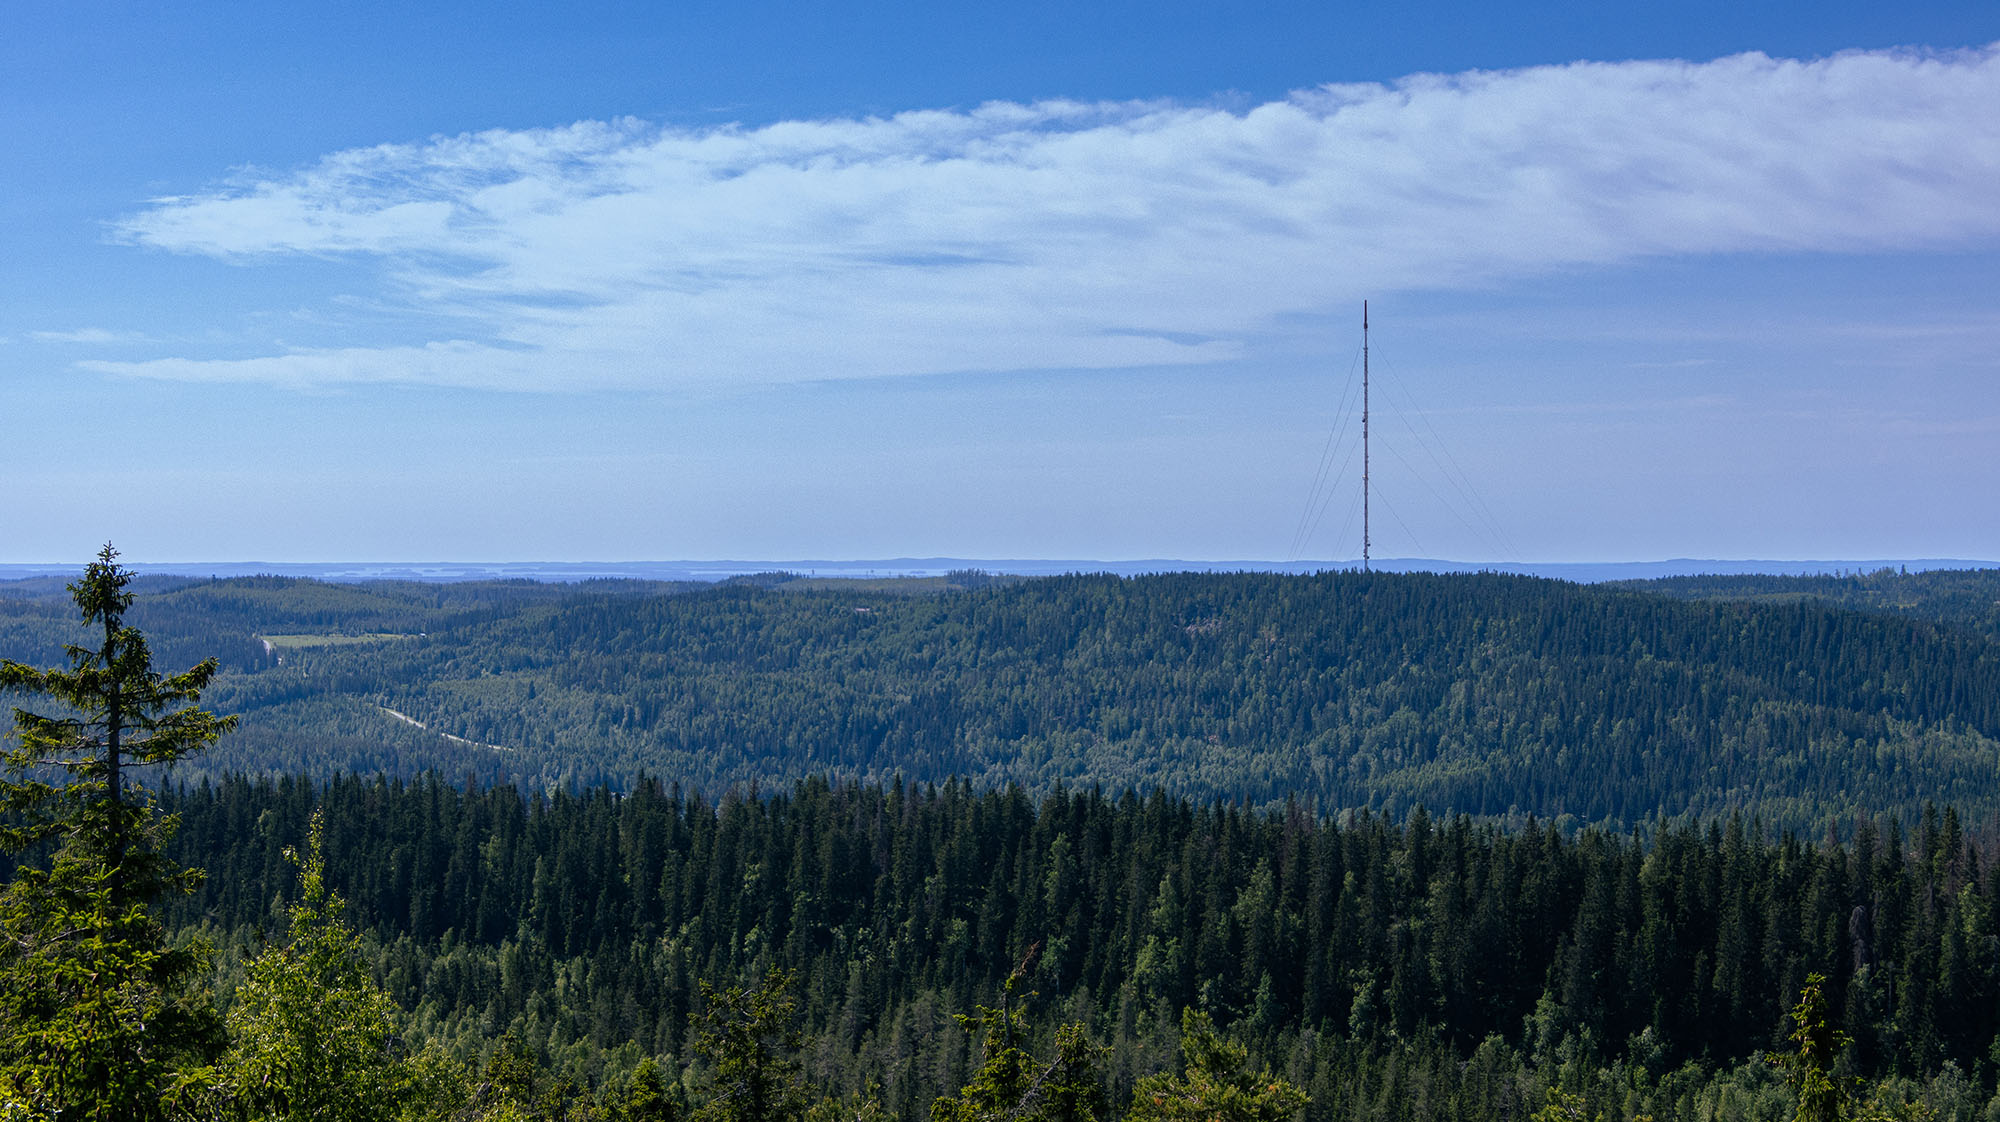 Finnish forest with a base station